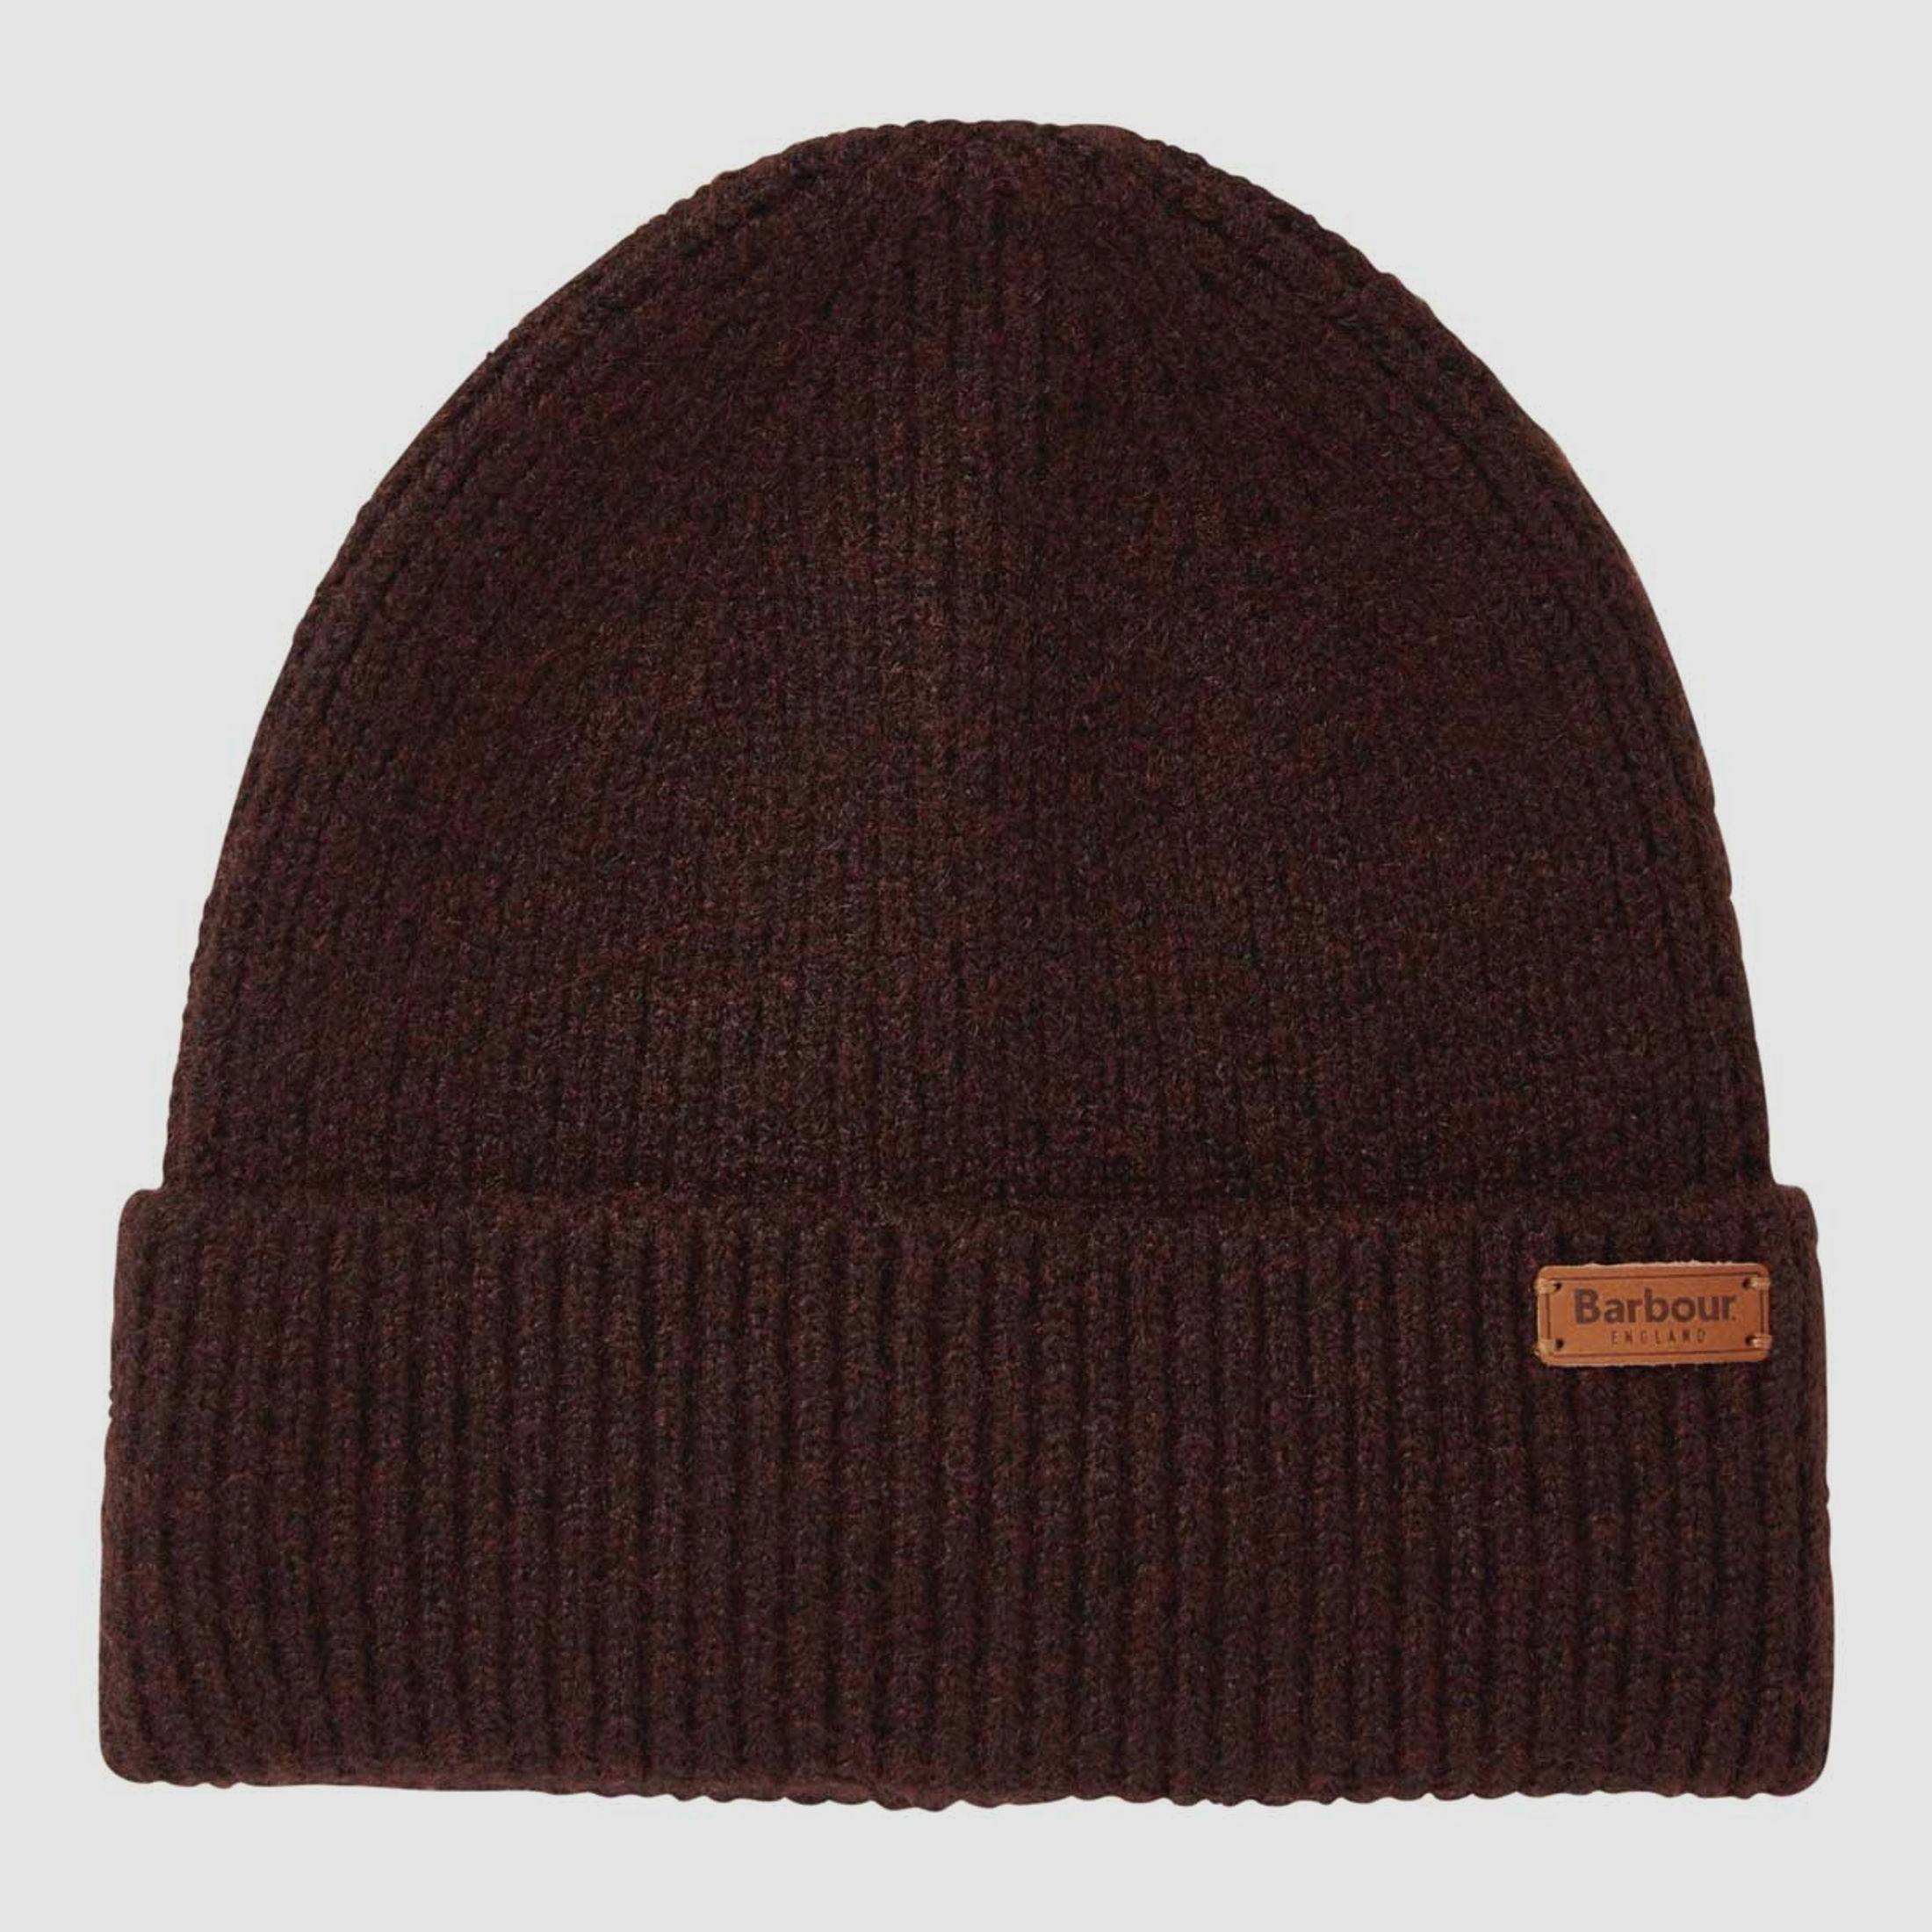 Barbour Beanie Pendle  chocolate